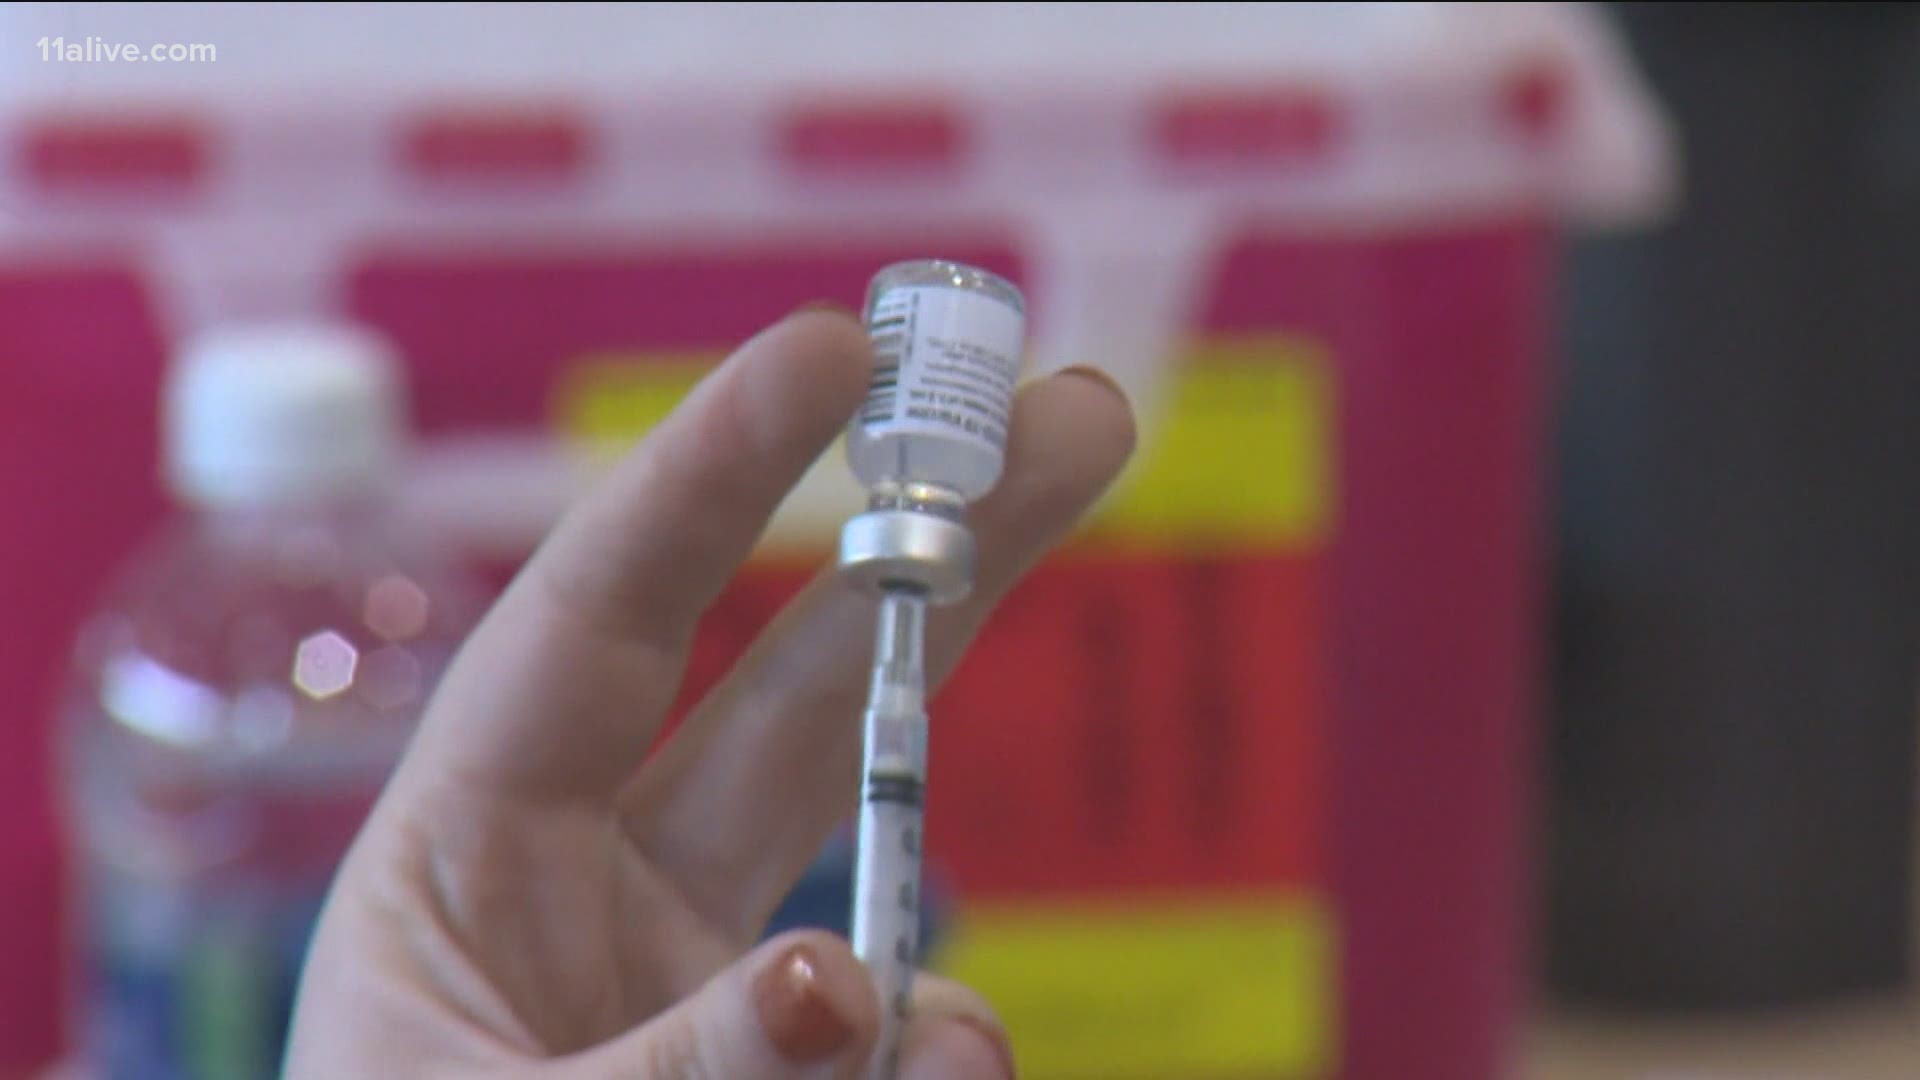 In a matter of days, school districts across the state will activate their COVID vaccine distribution plans.